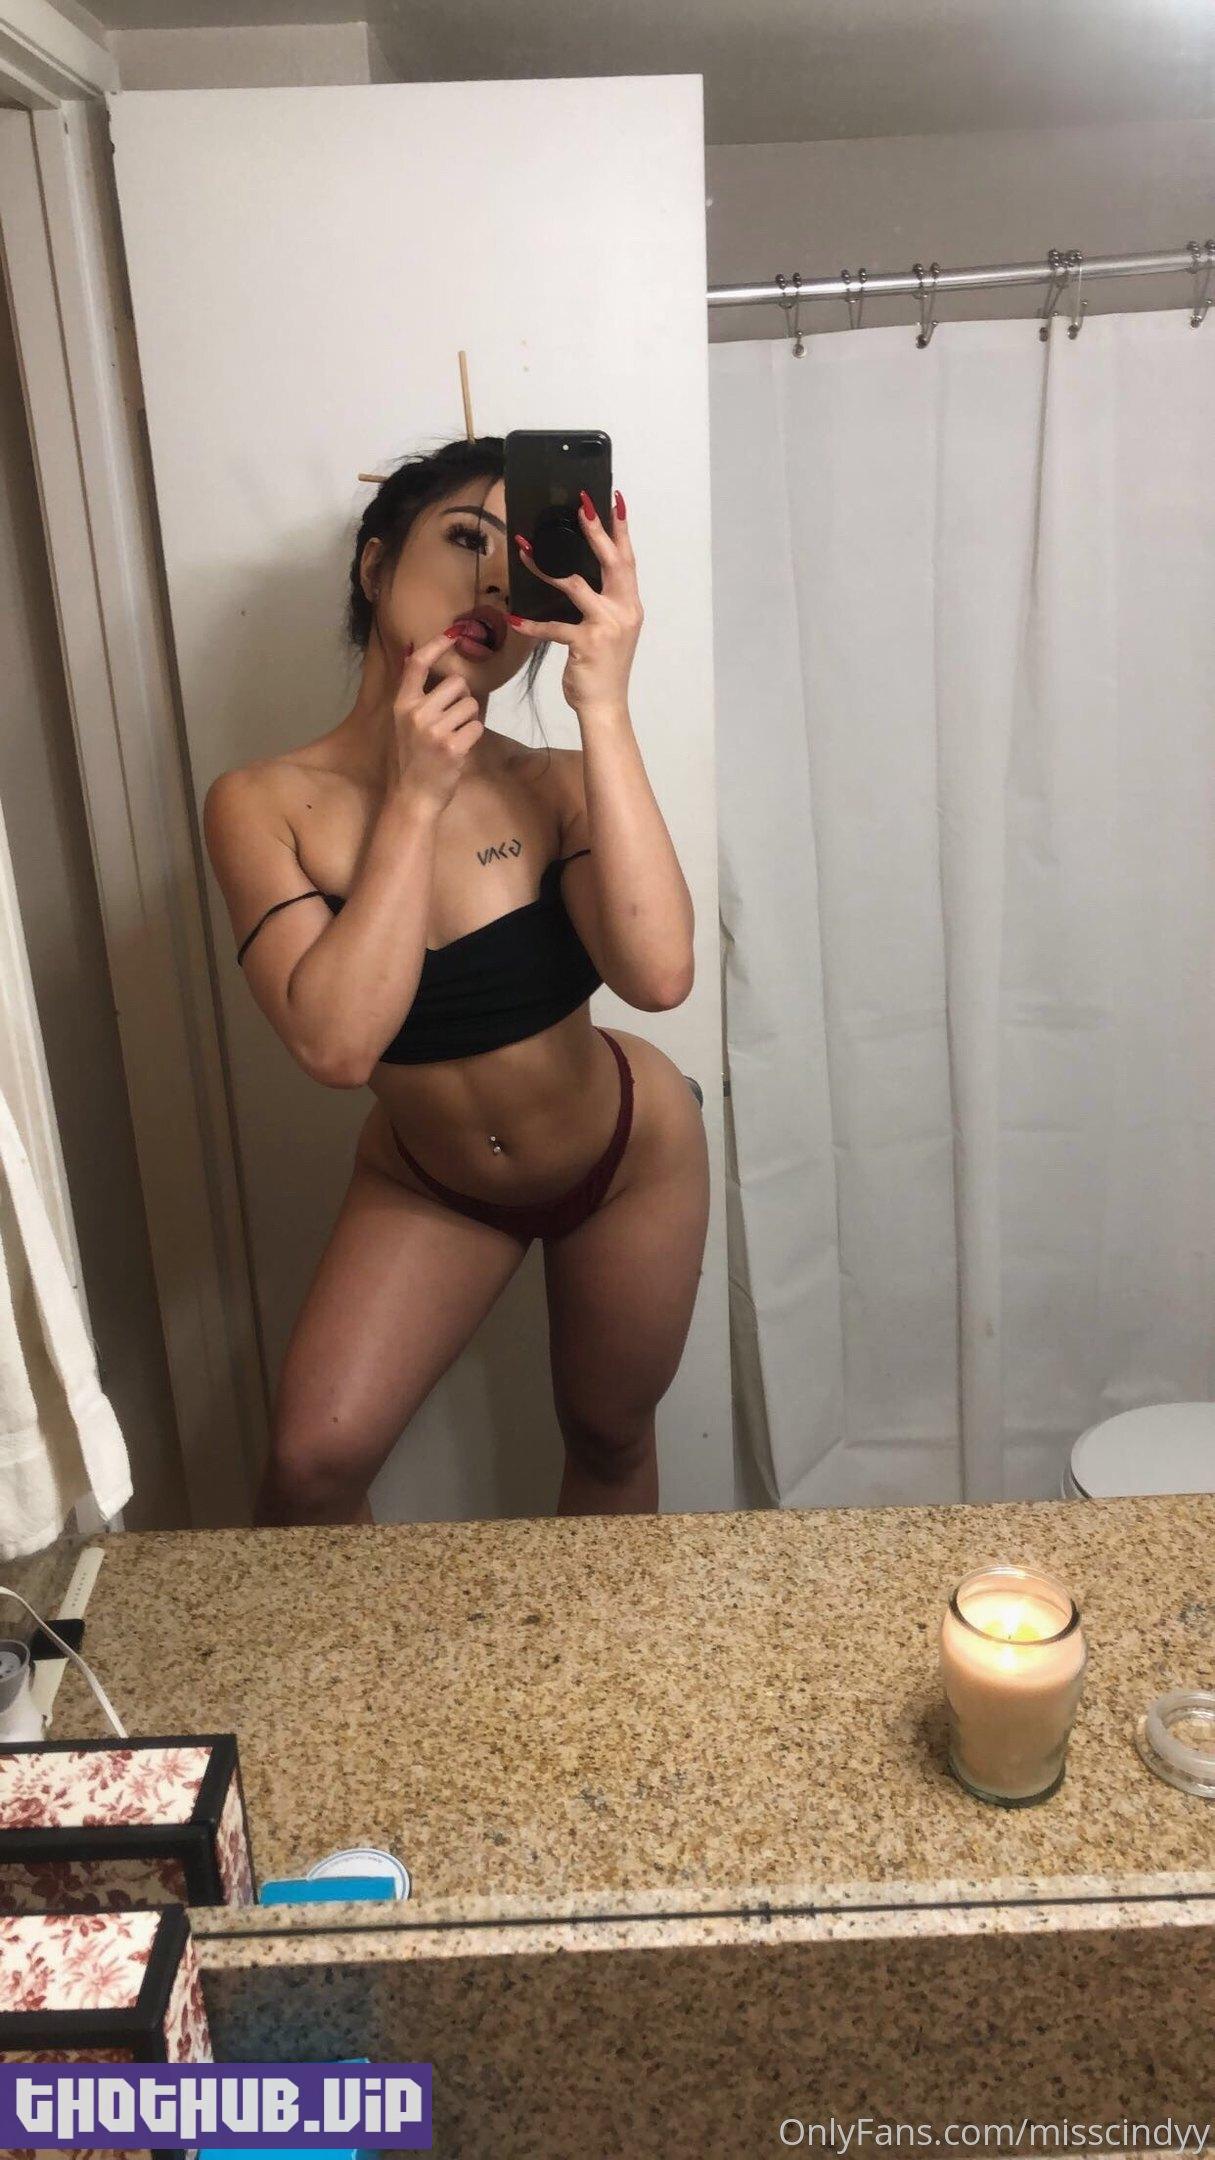 1661530208 481 Misscindyy %E2%80%93 Big Booty Asian Nudes